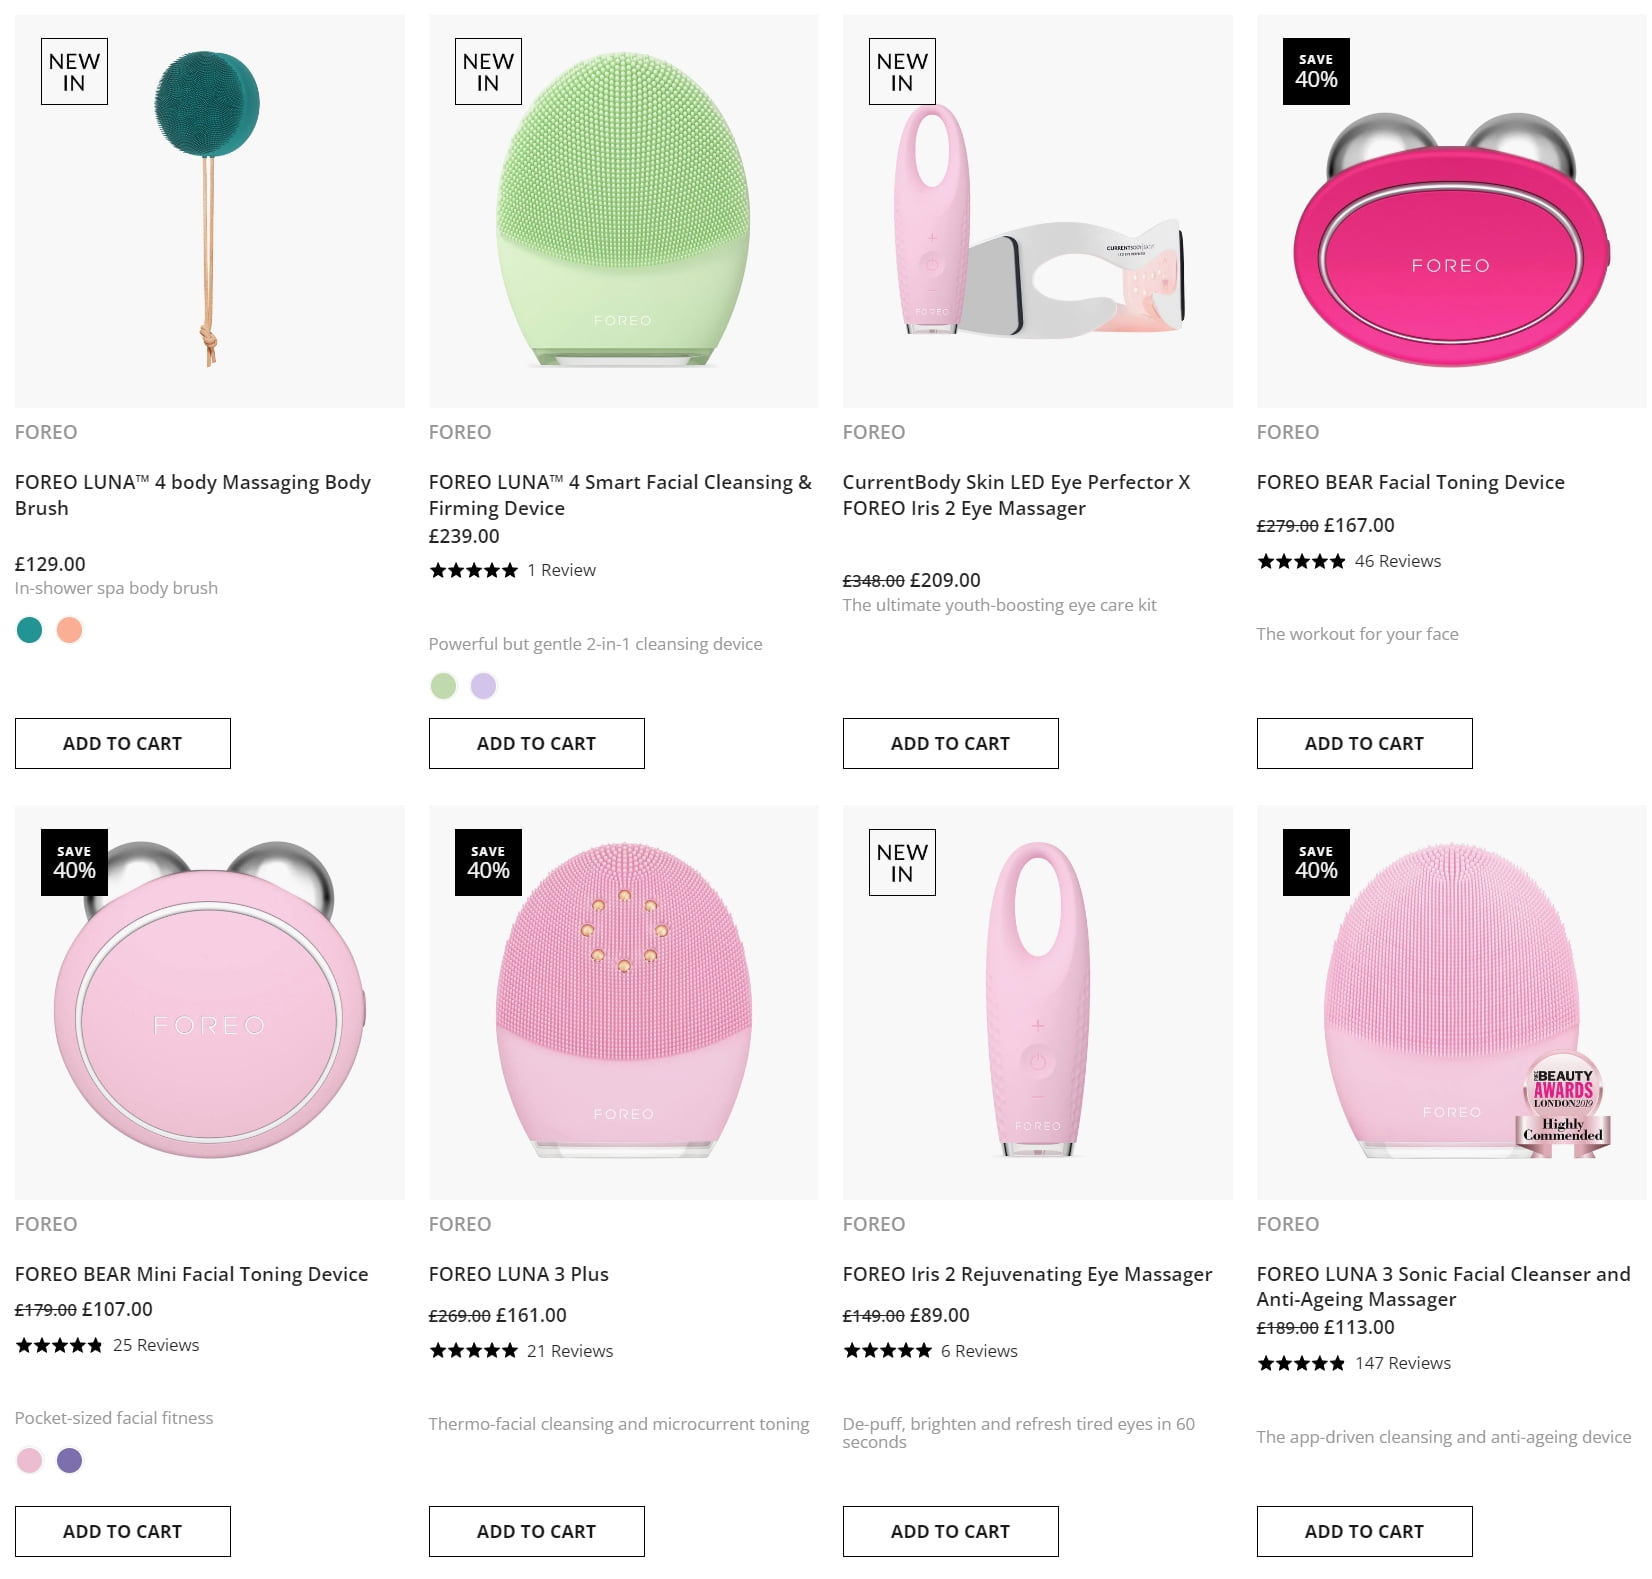 40% off all FOREO at CurrentBody